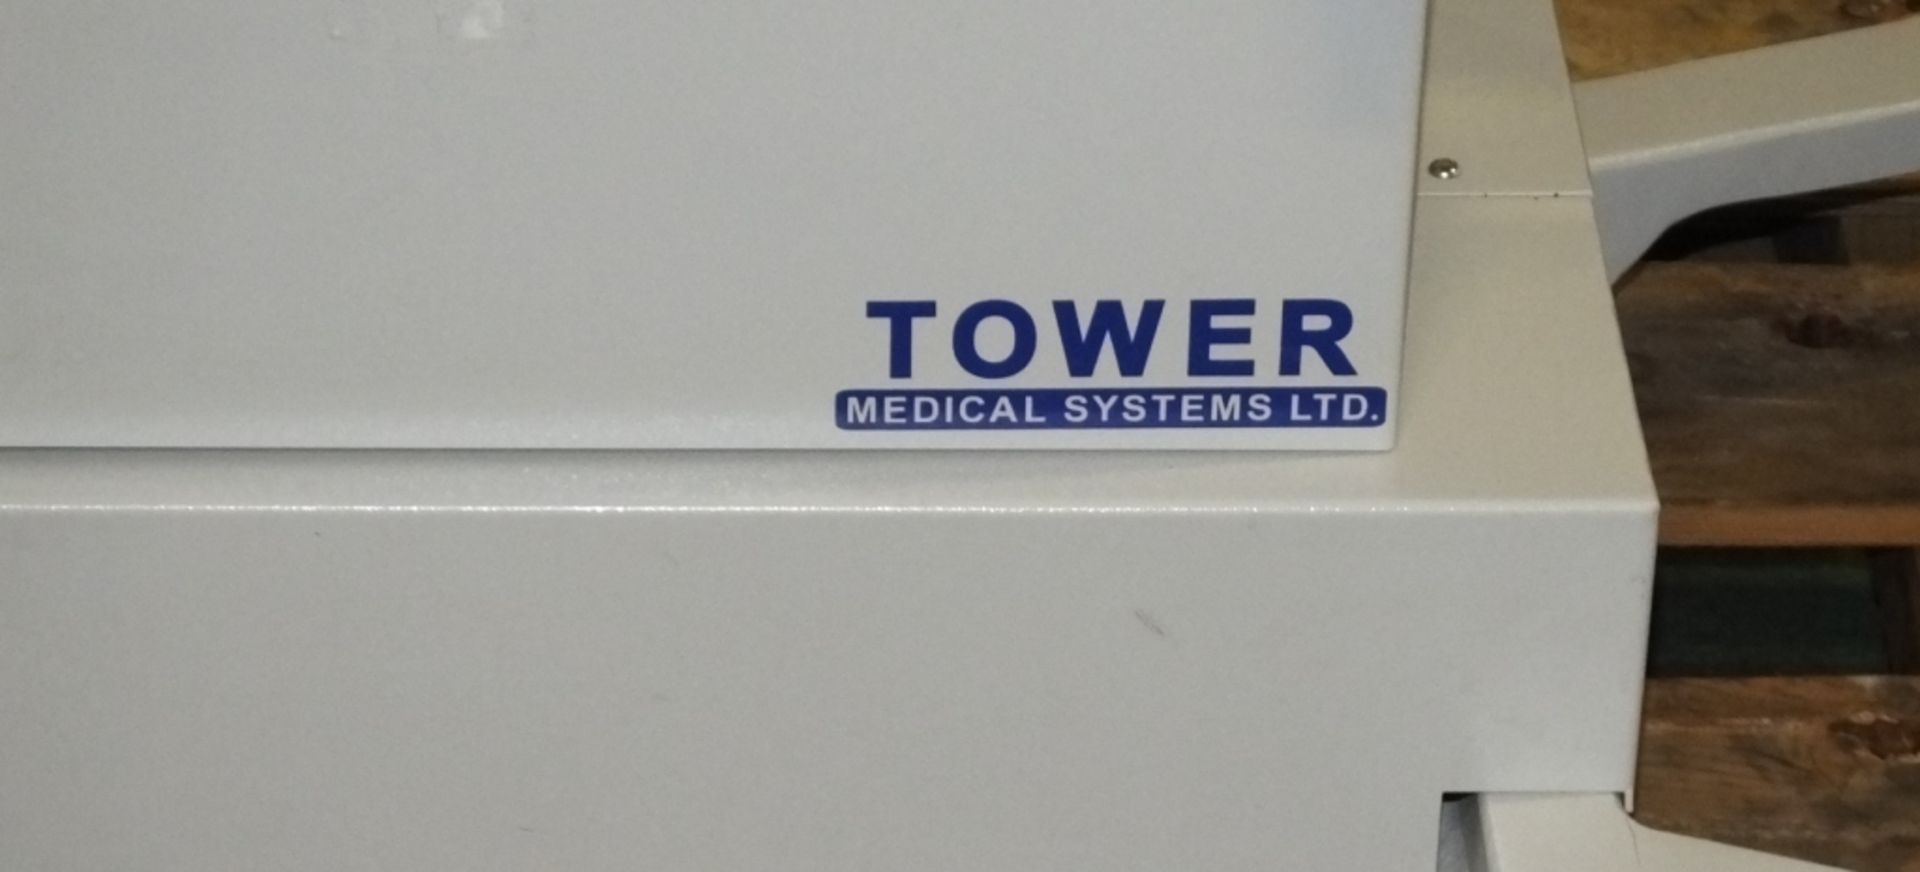 Tower Medical Solutions medical examination chair - Image 2 of 4